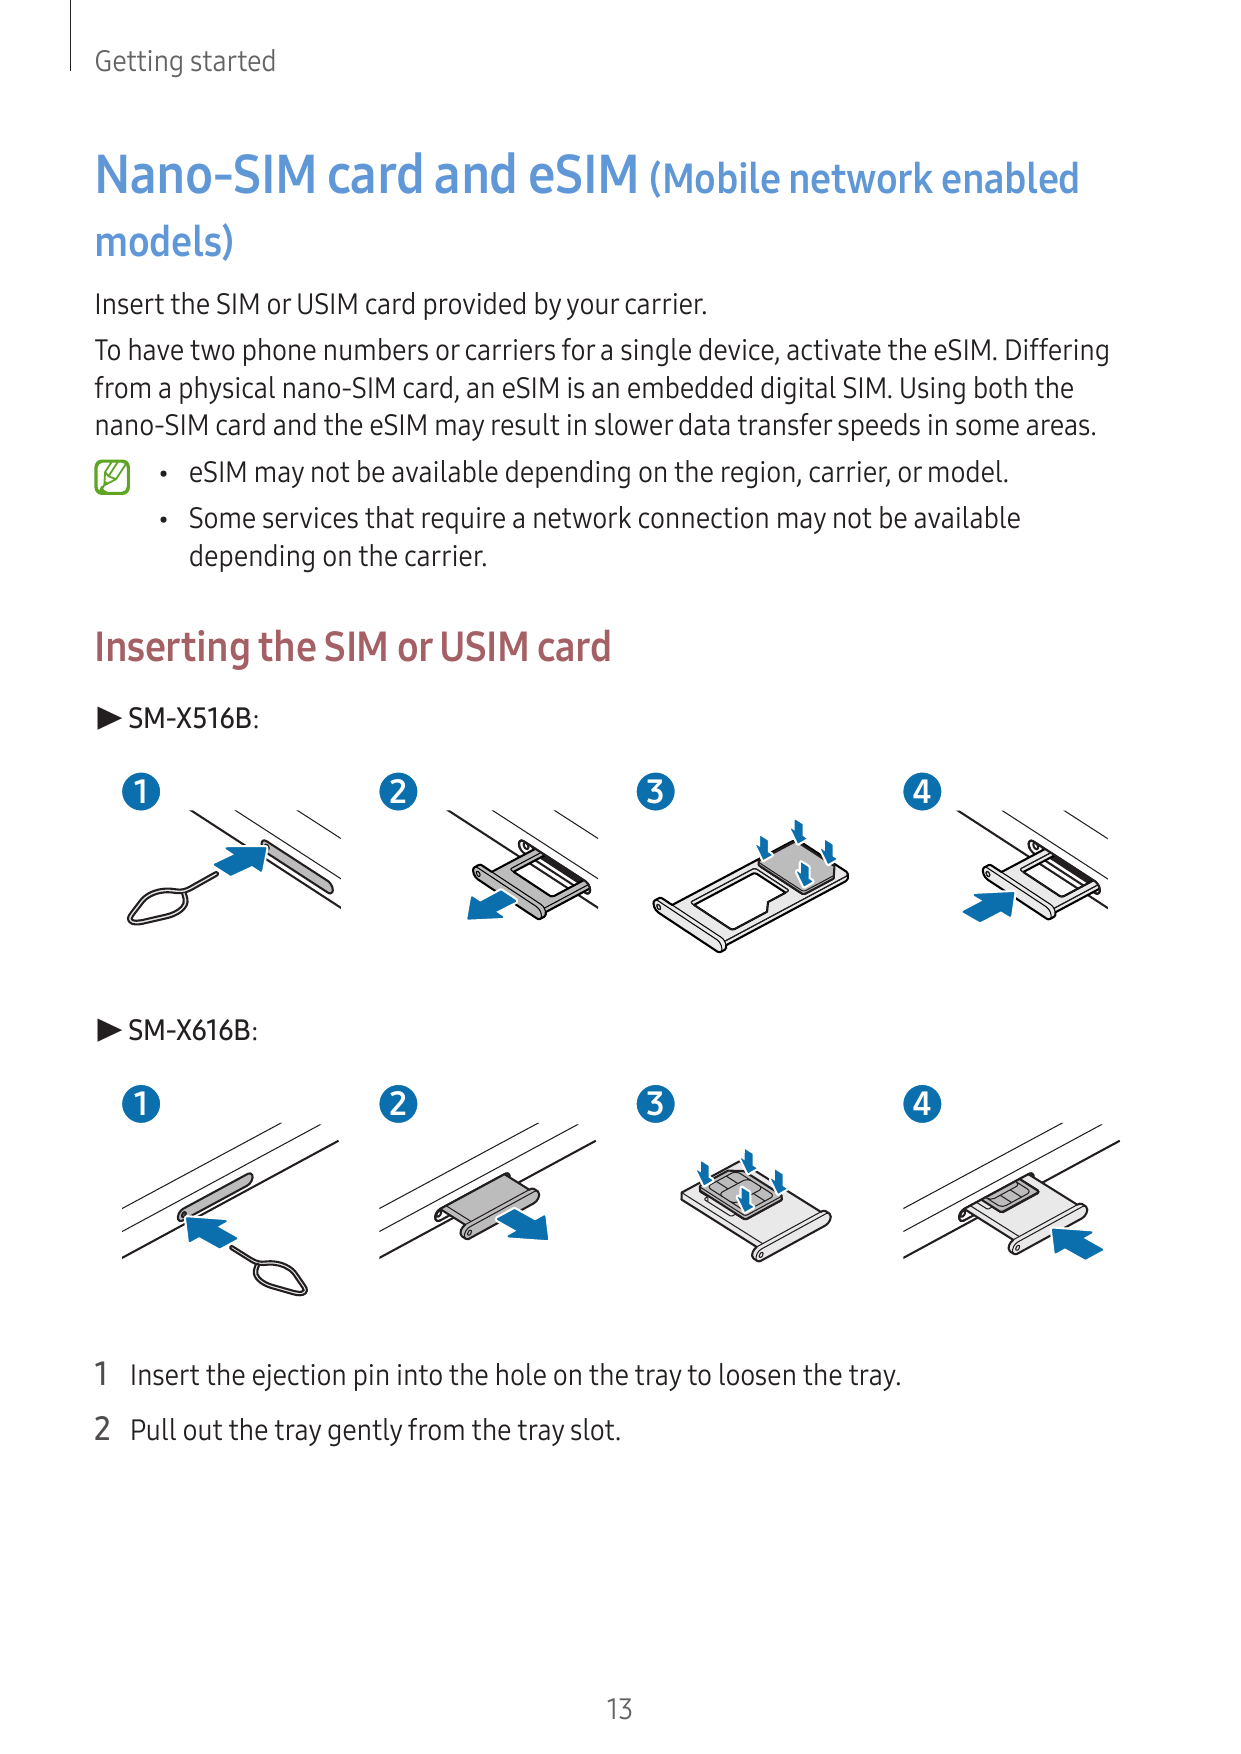 Getting startedNano-SIM card and eSIM (Mobile network enabledmodels)Insert the SIM or USIM card provided by your carrier.To have